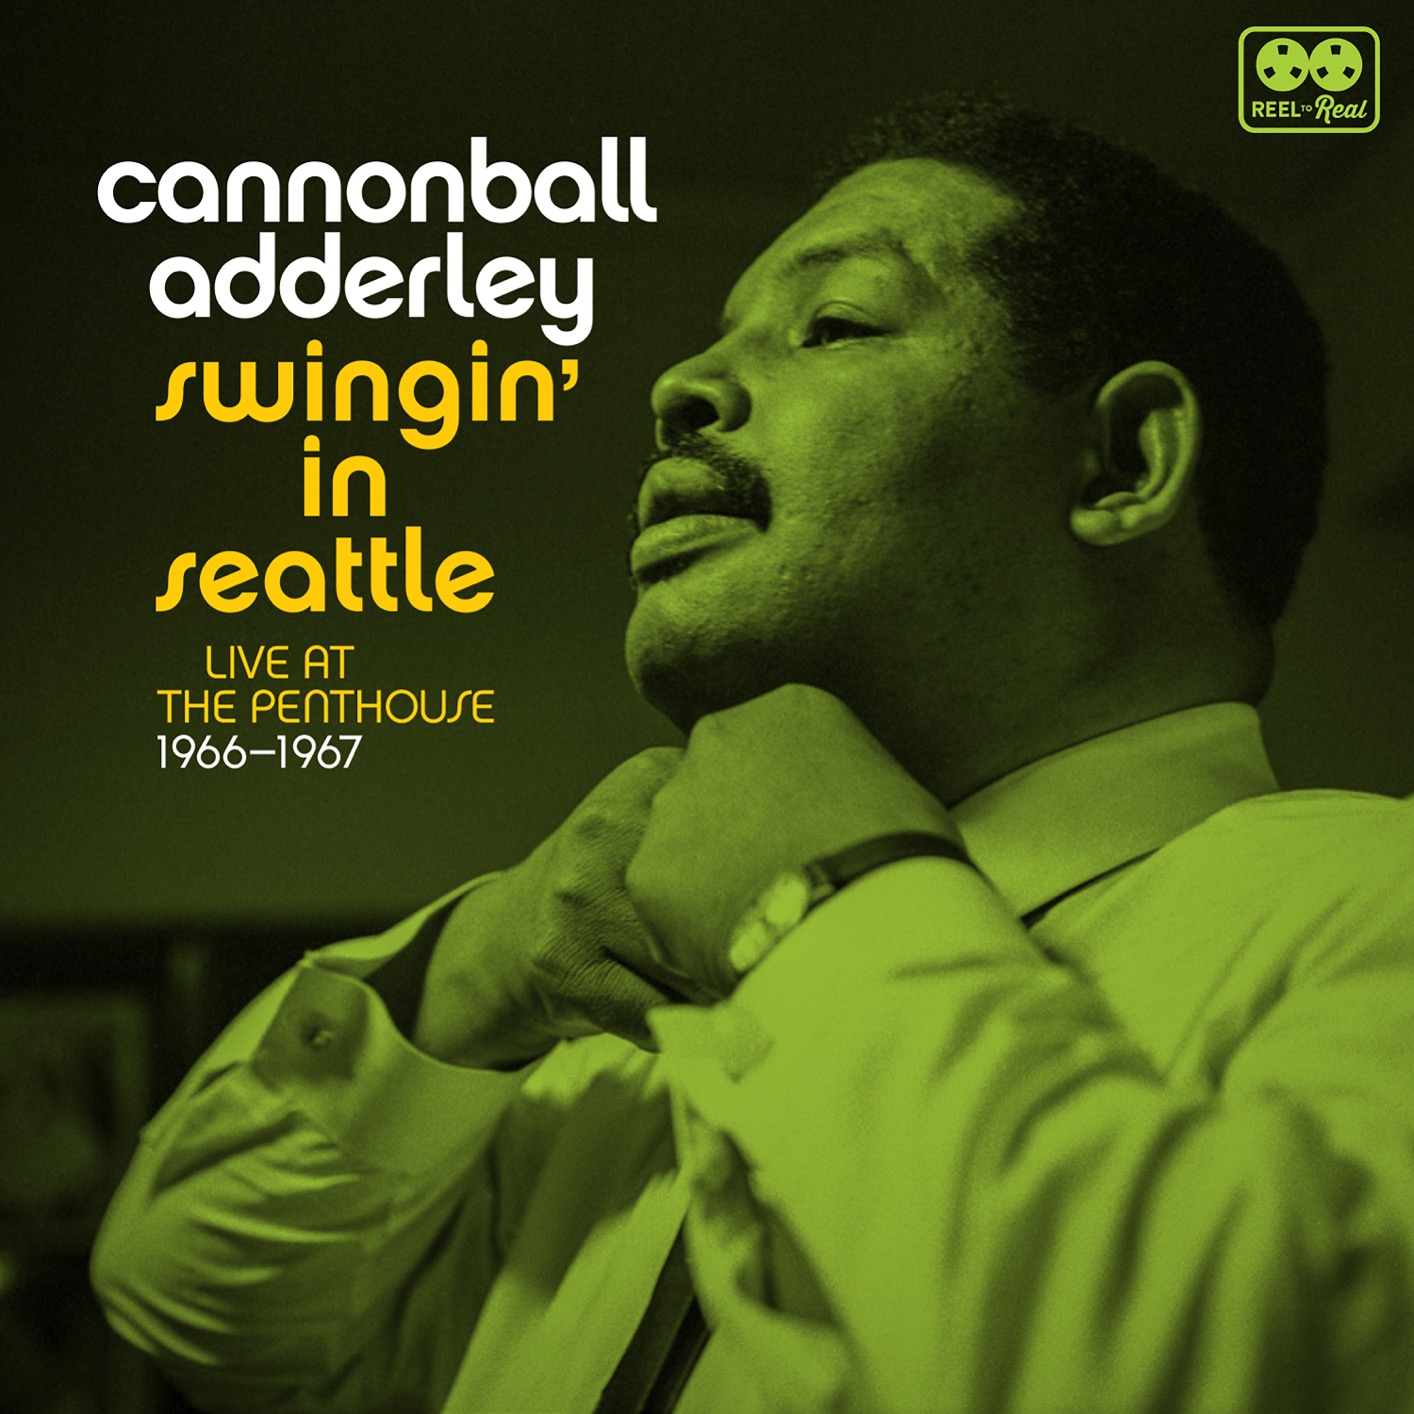 Cannonball Adderley - Swingin’ in Seattle - Live at the Penthouse 1966-1967 (Remastered) (2019) [FLAC 24bit/96kHz]